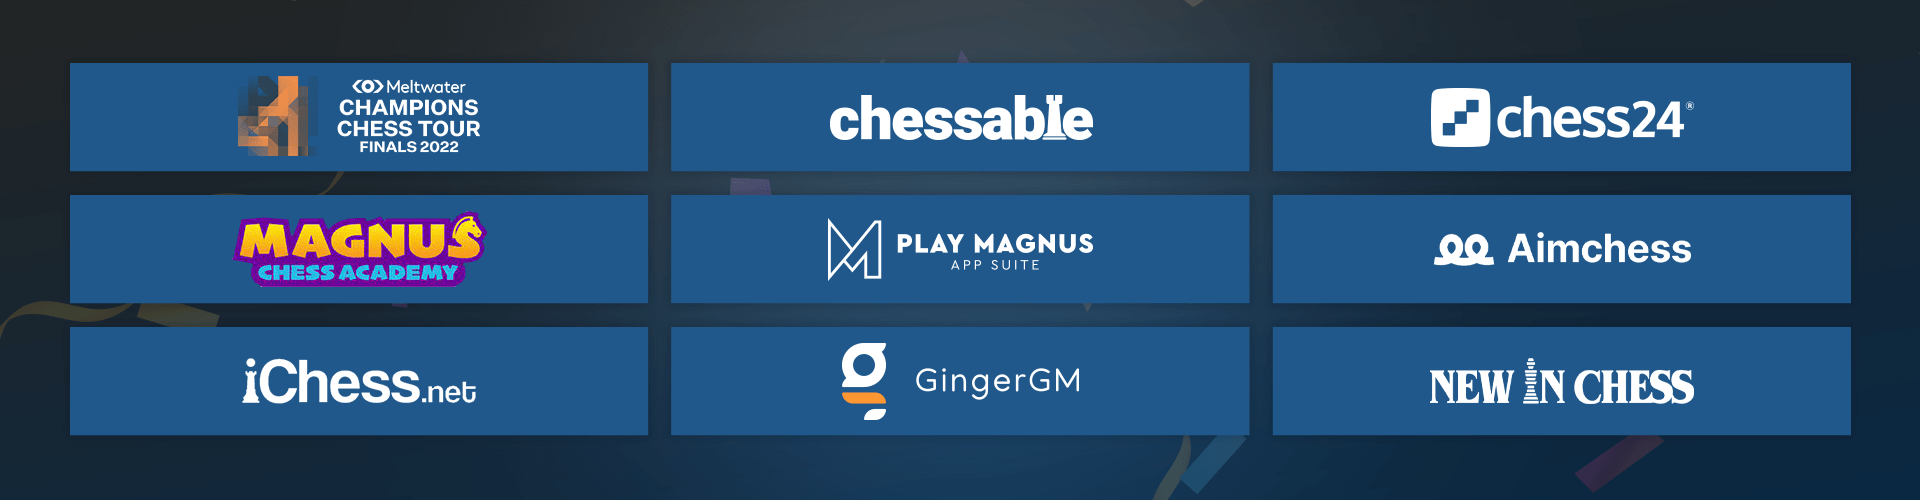 Chessable on X: PRO membership to Chessable is included in our